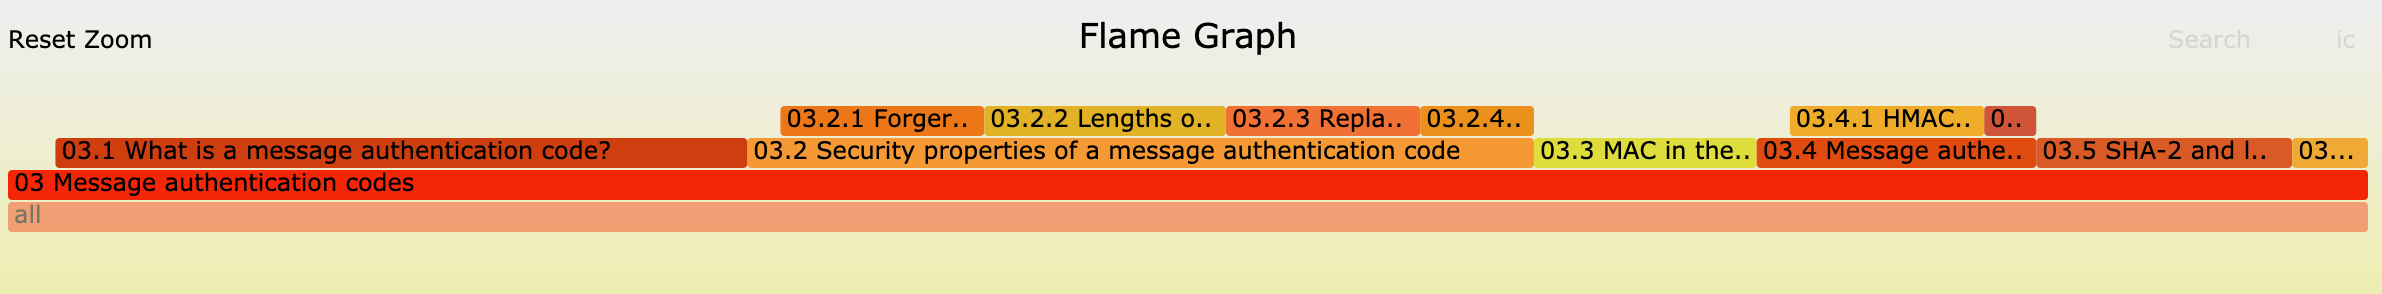 flamegraph not nested enough